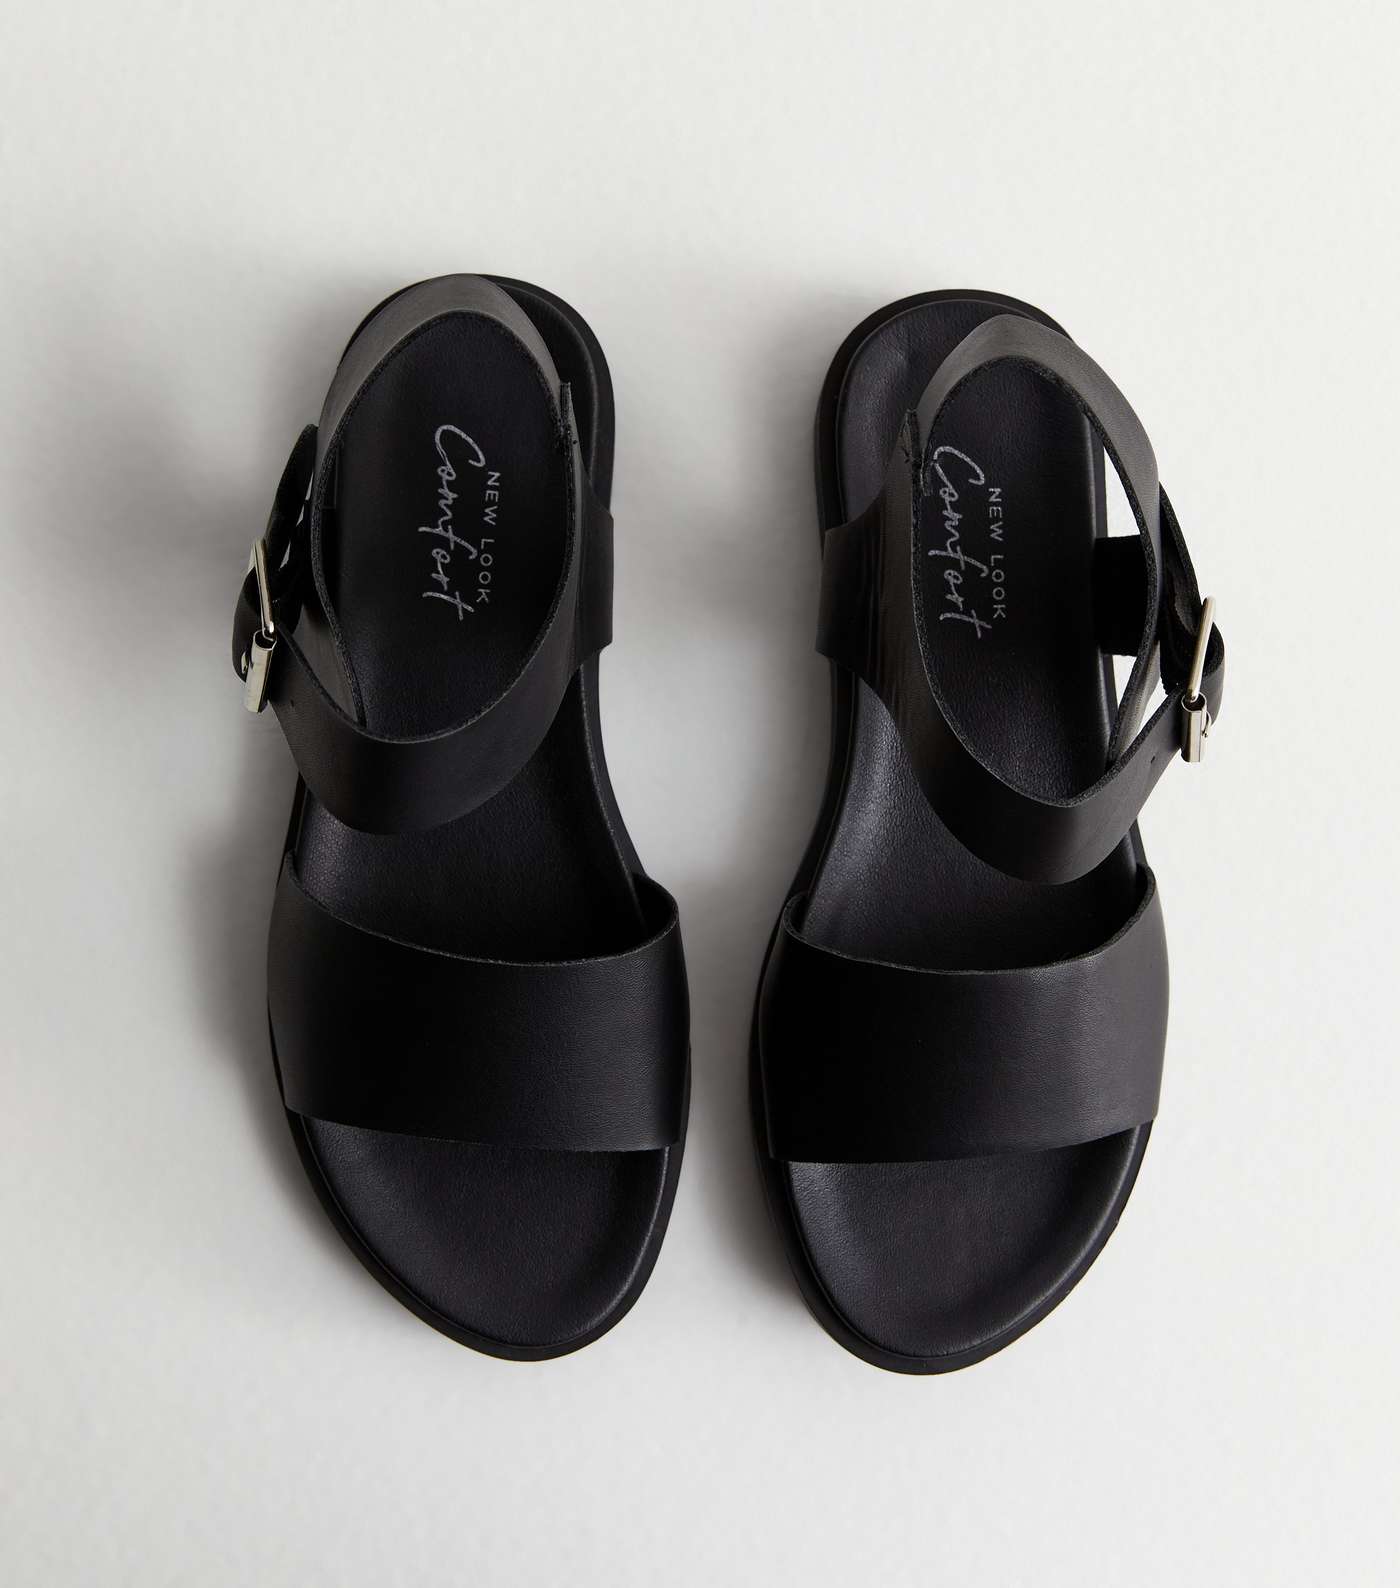 Black Leather-Look Buckle Strap Sandals | New Look